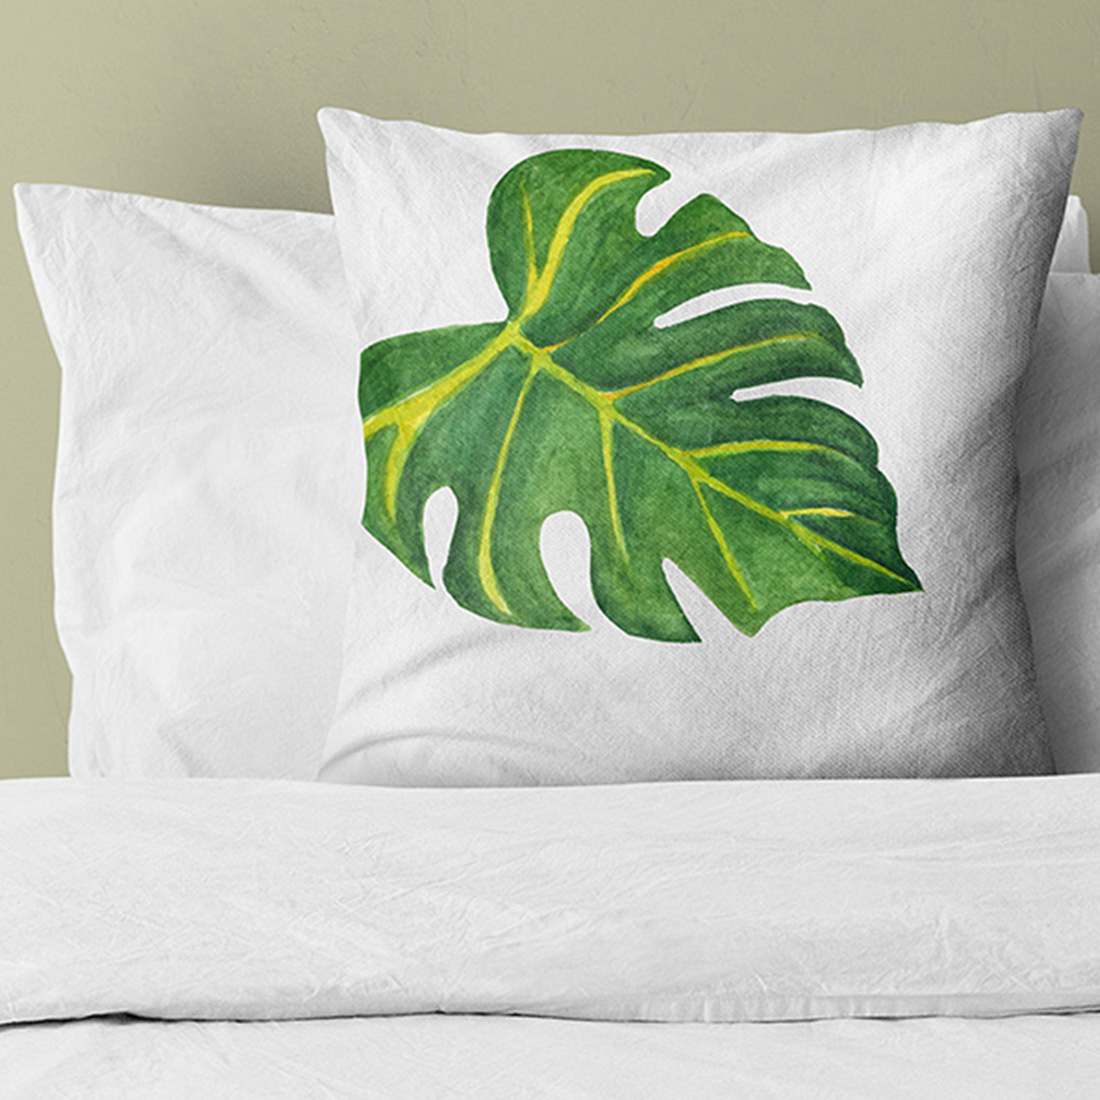 White pillow with green leaves.